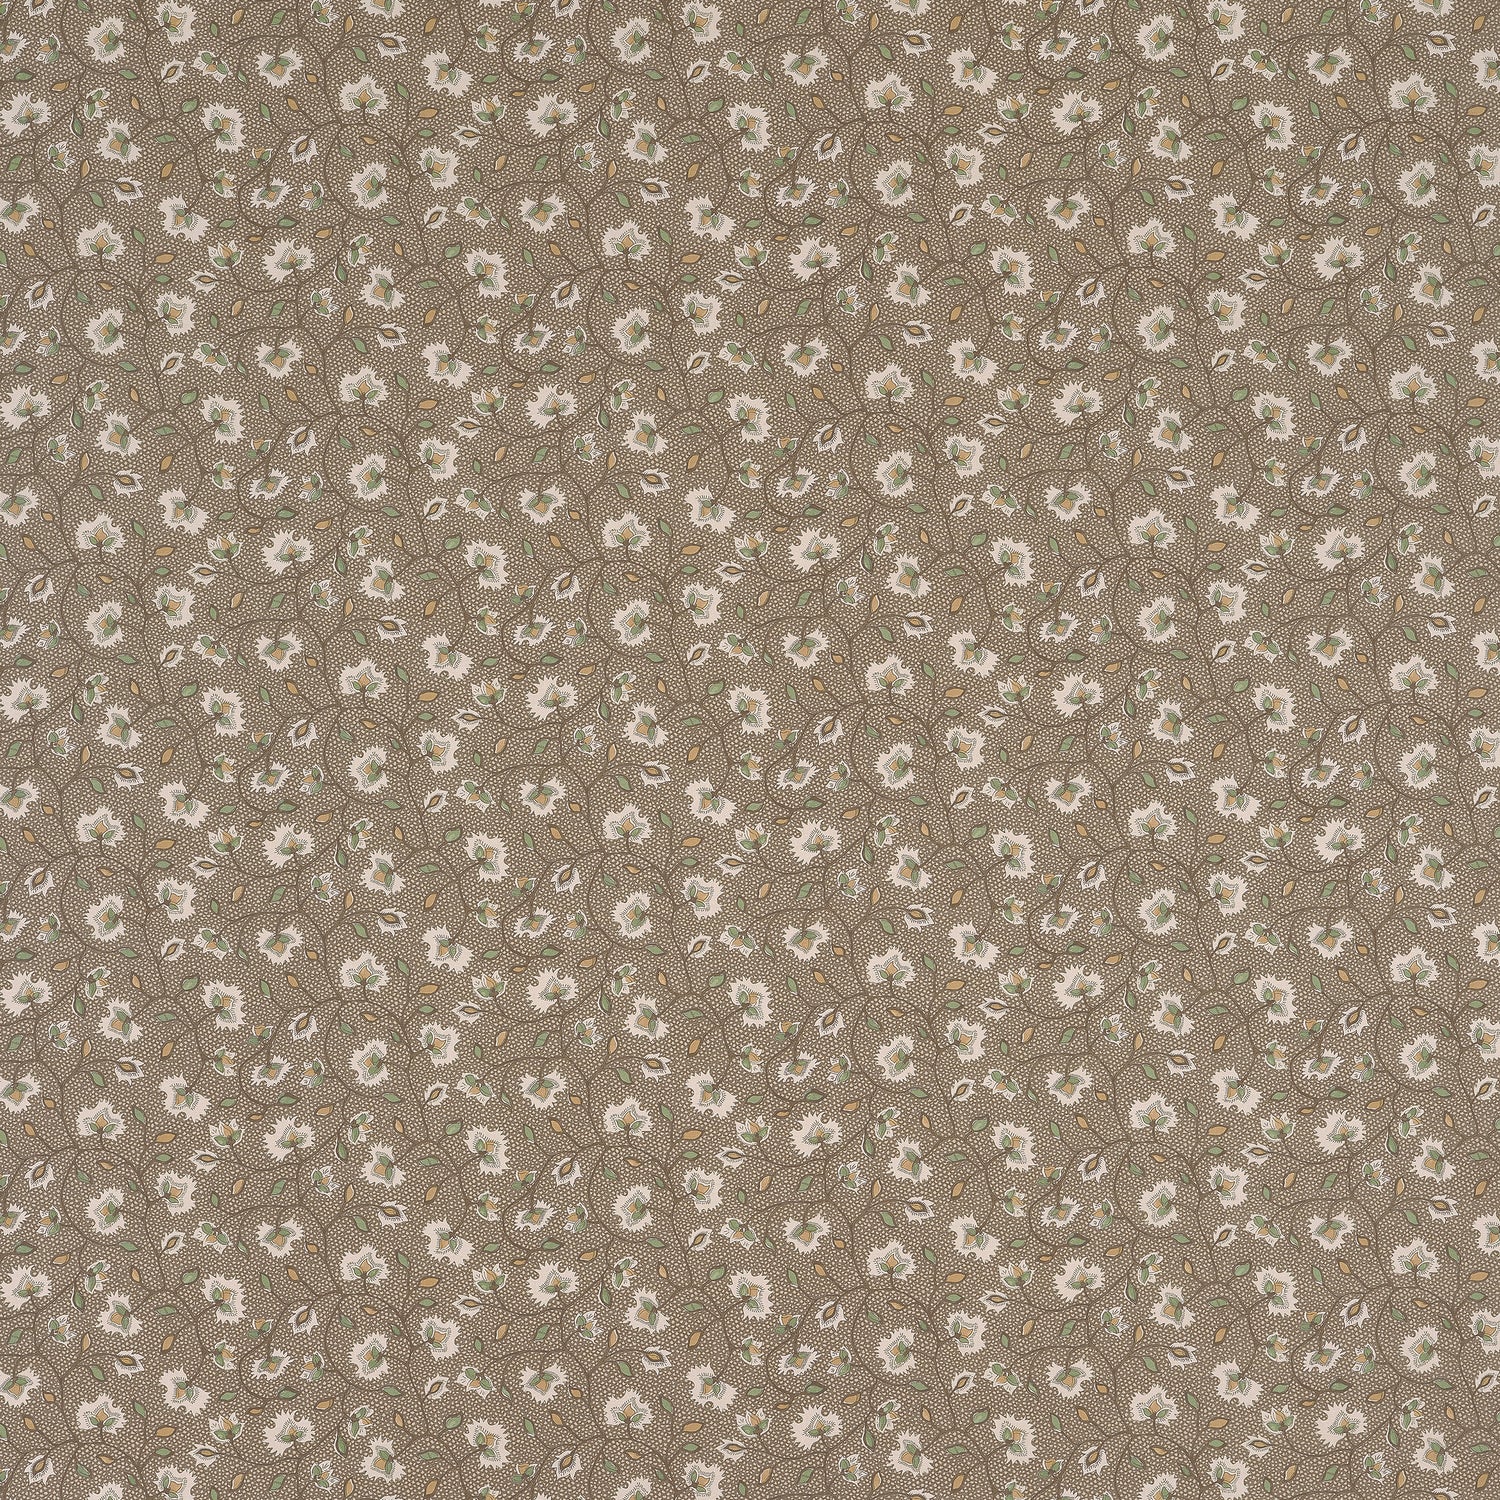 Chelsea fabric in chestnut color - pattern number AF57843 - by Anna French in the Bristol collection